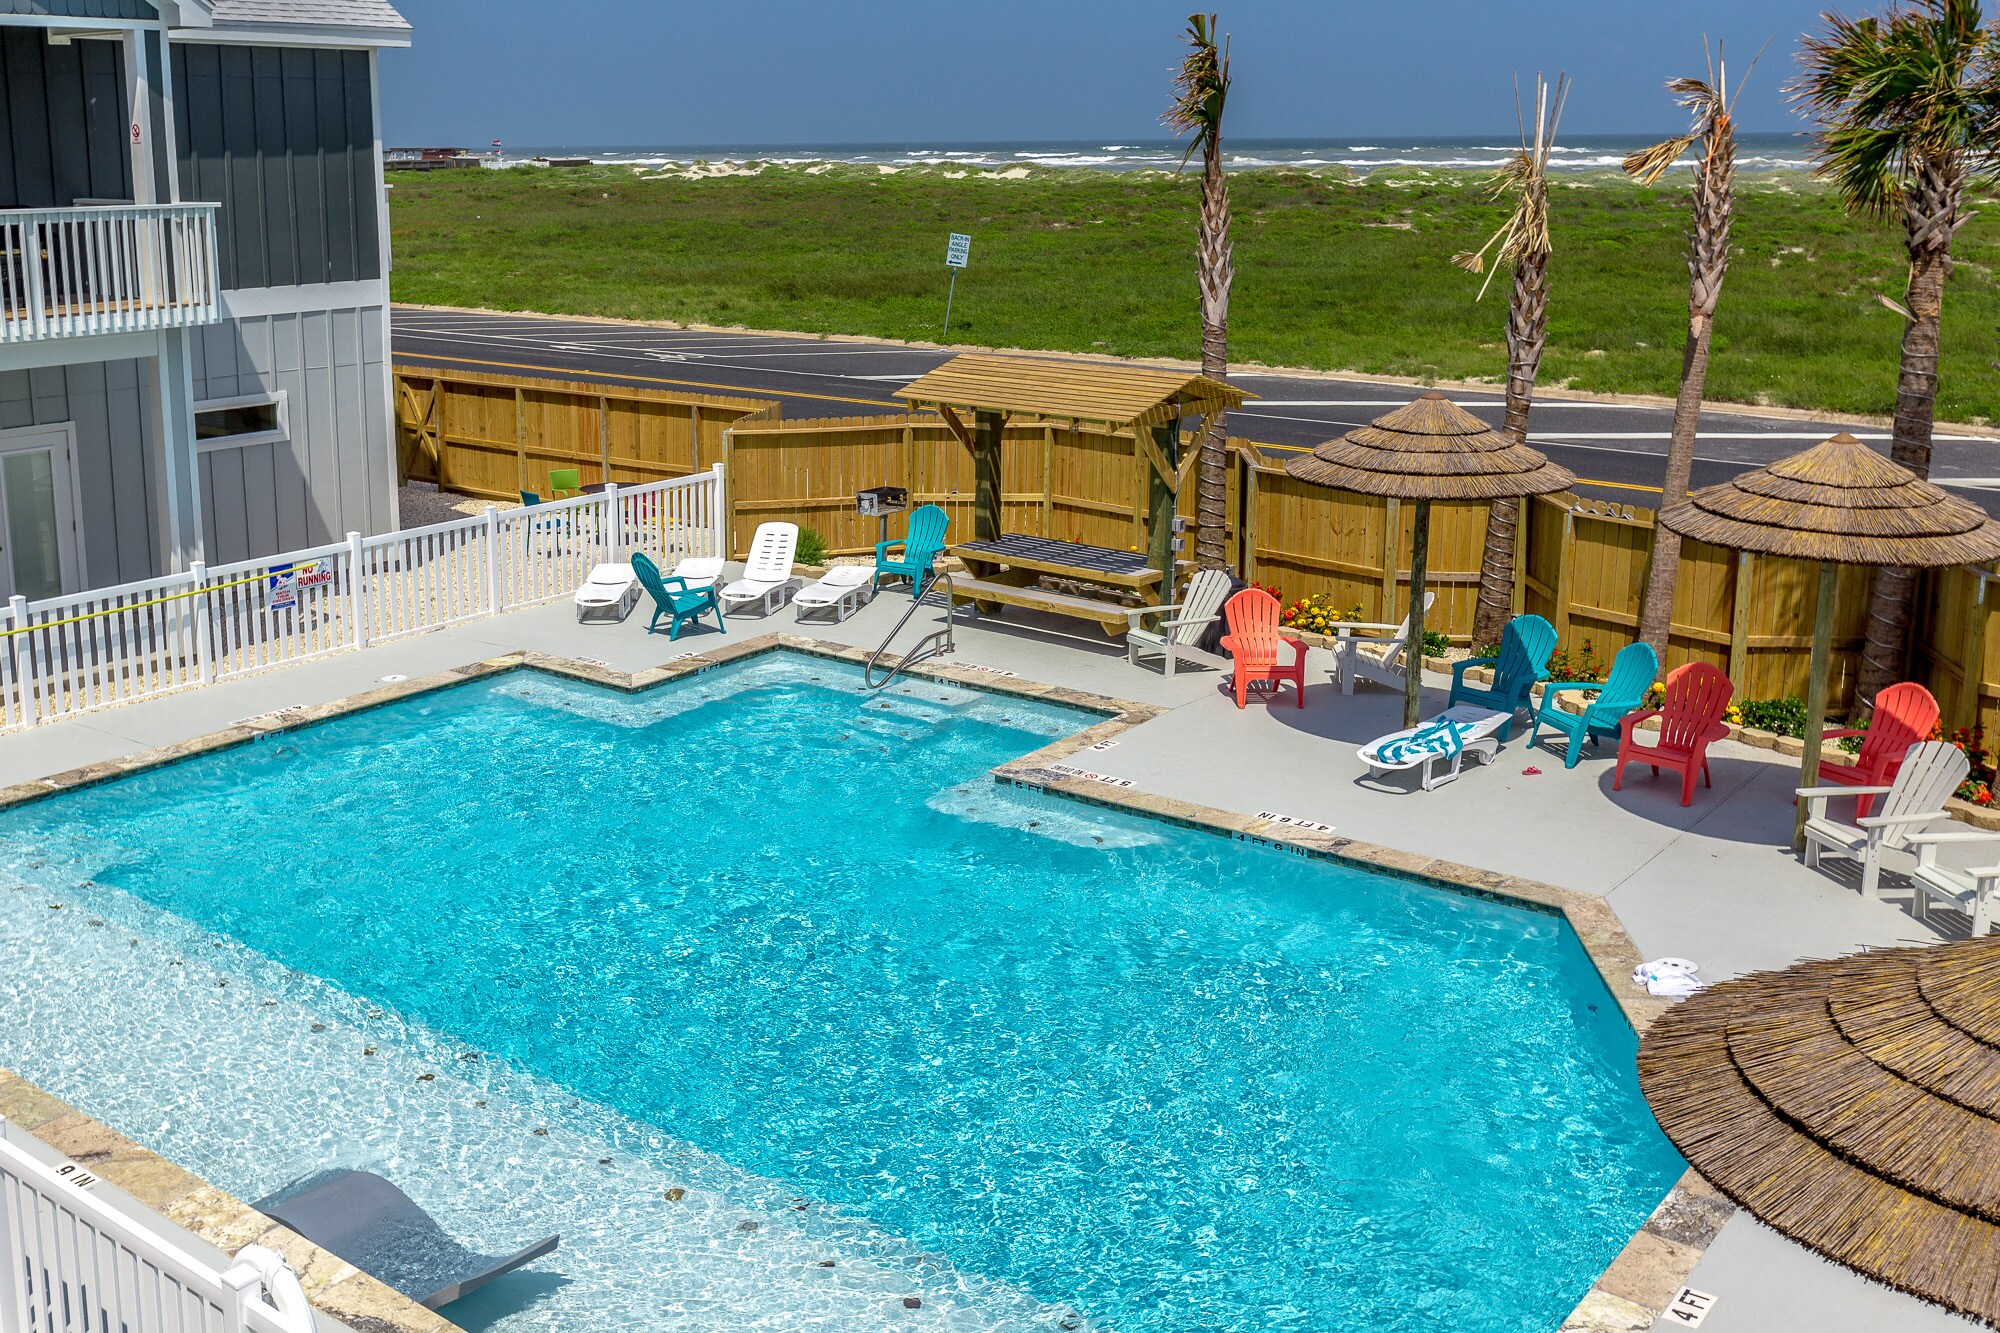 Beach or pool? Both are a stroll away!